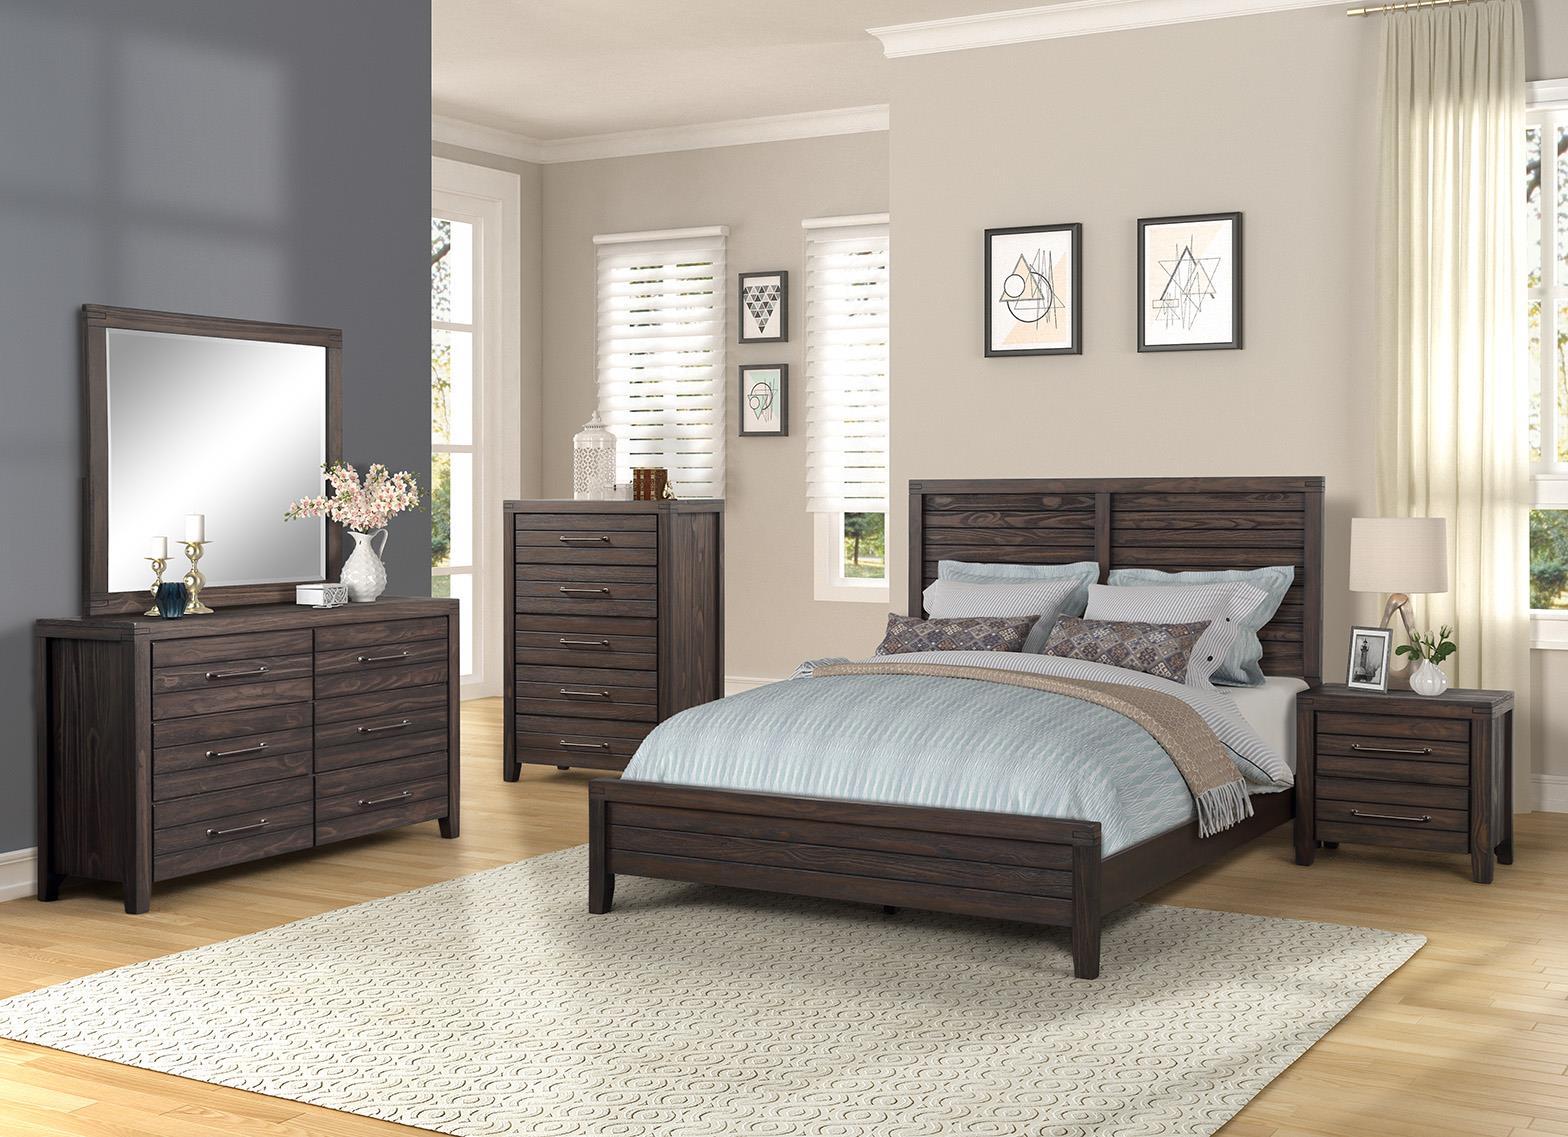 Contemporary, Traditional Panel Bedroom Set CRESTWOOD 1465-105-Set 1465-105-2NDM-5PC in Auburn, Brown 